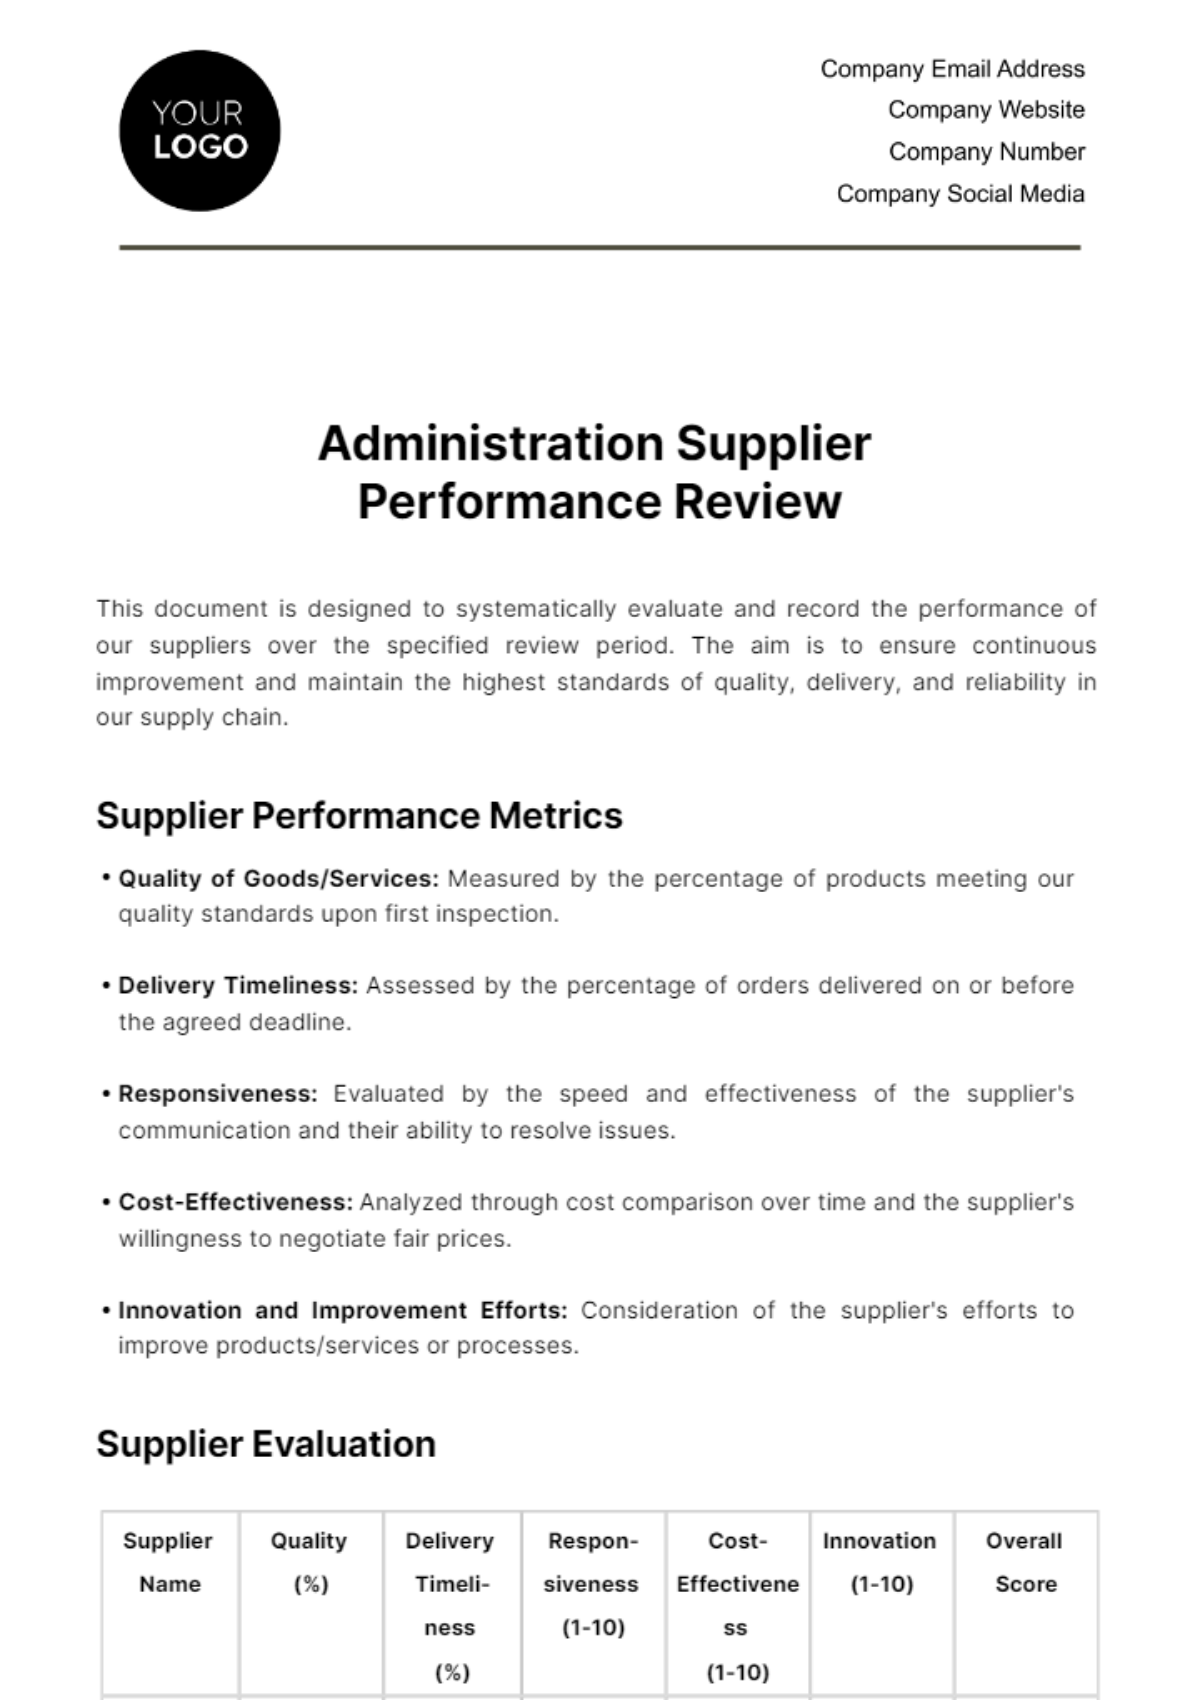 Administration Supplier Performance Review Template